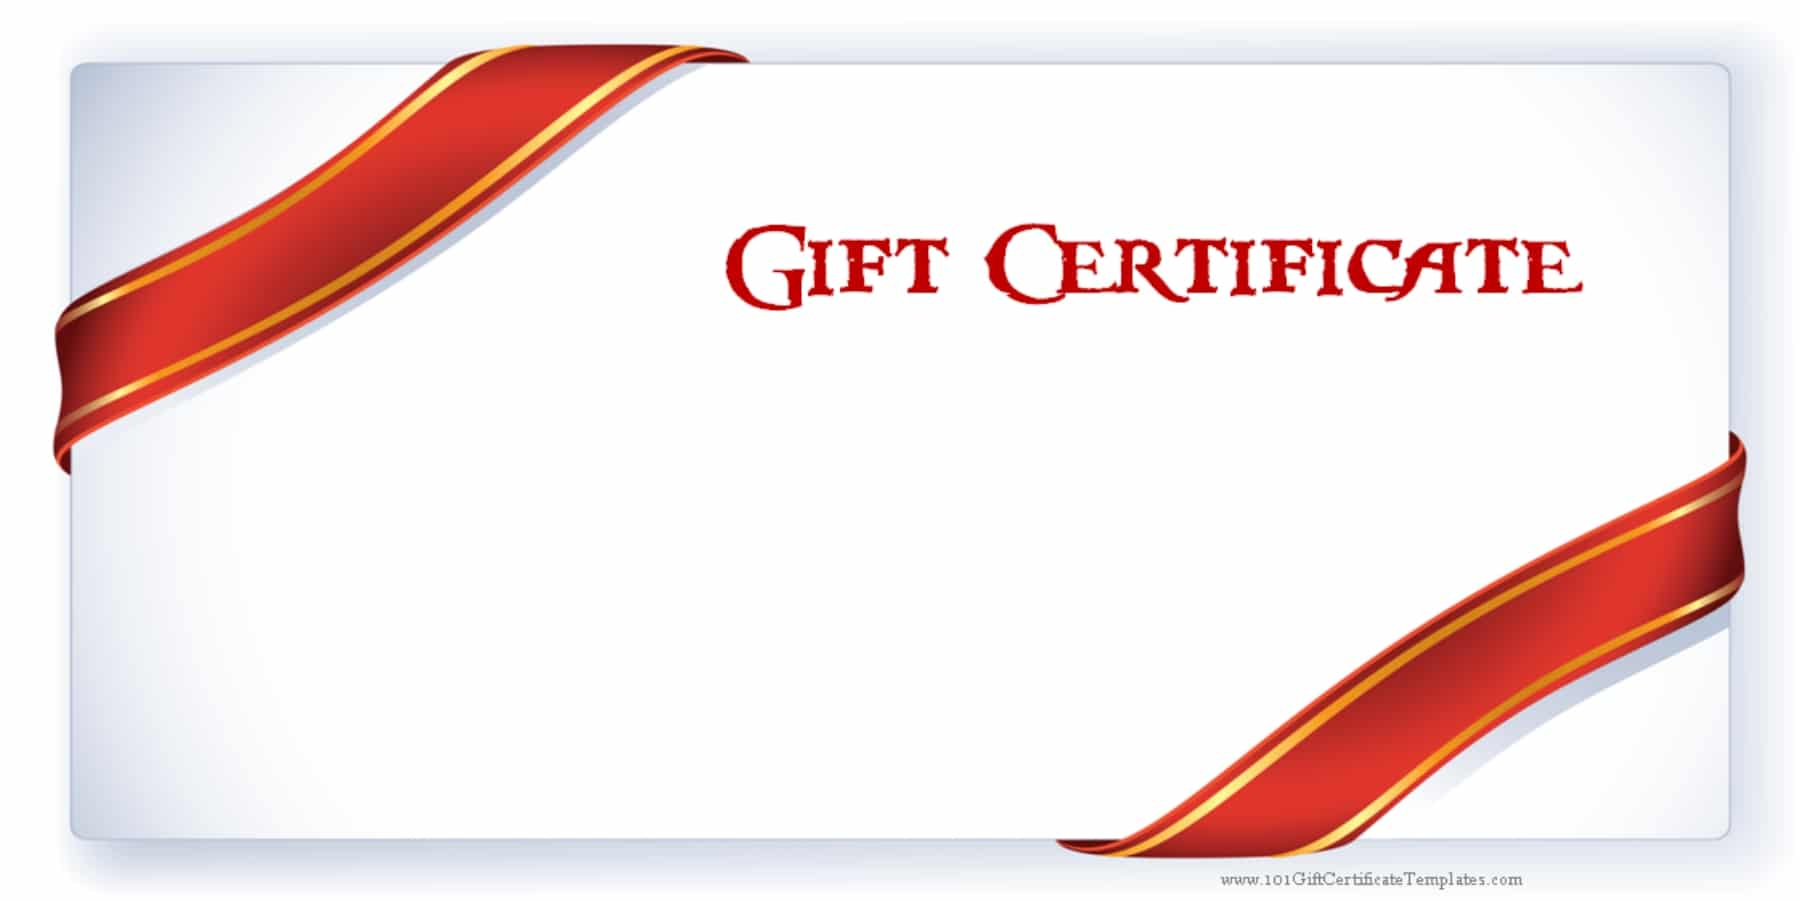 Printable Gift Certificate Templates - Free Printable Christmas Gift Voucher Templates